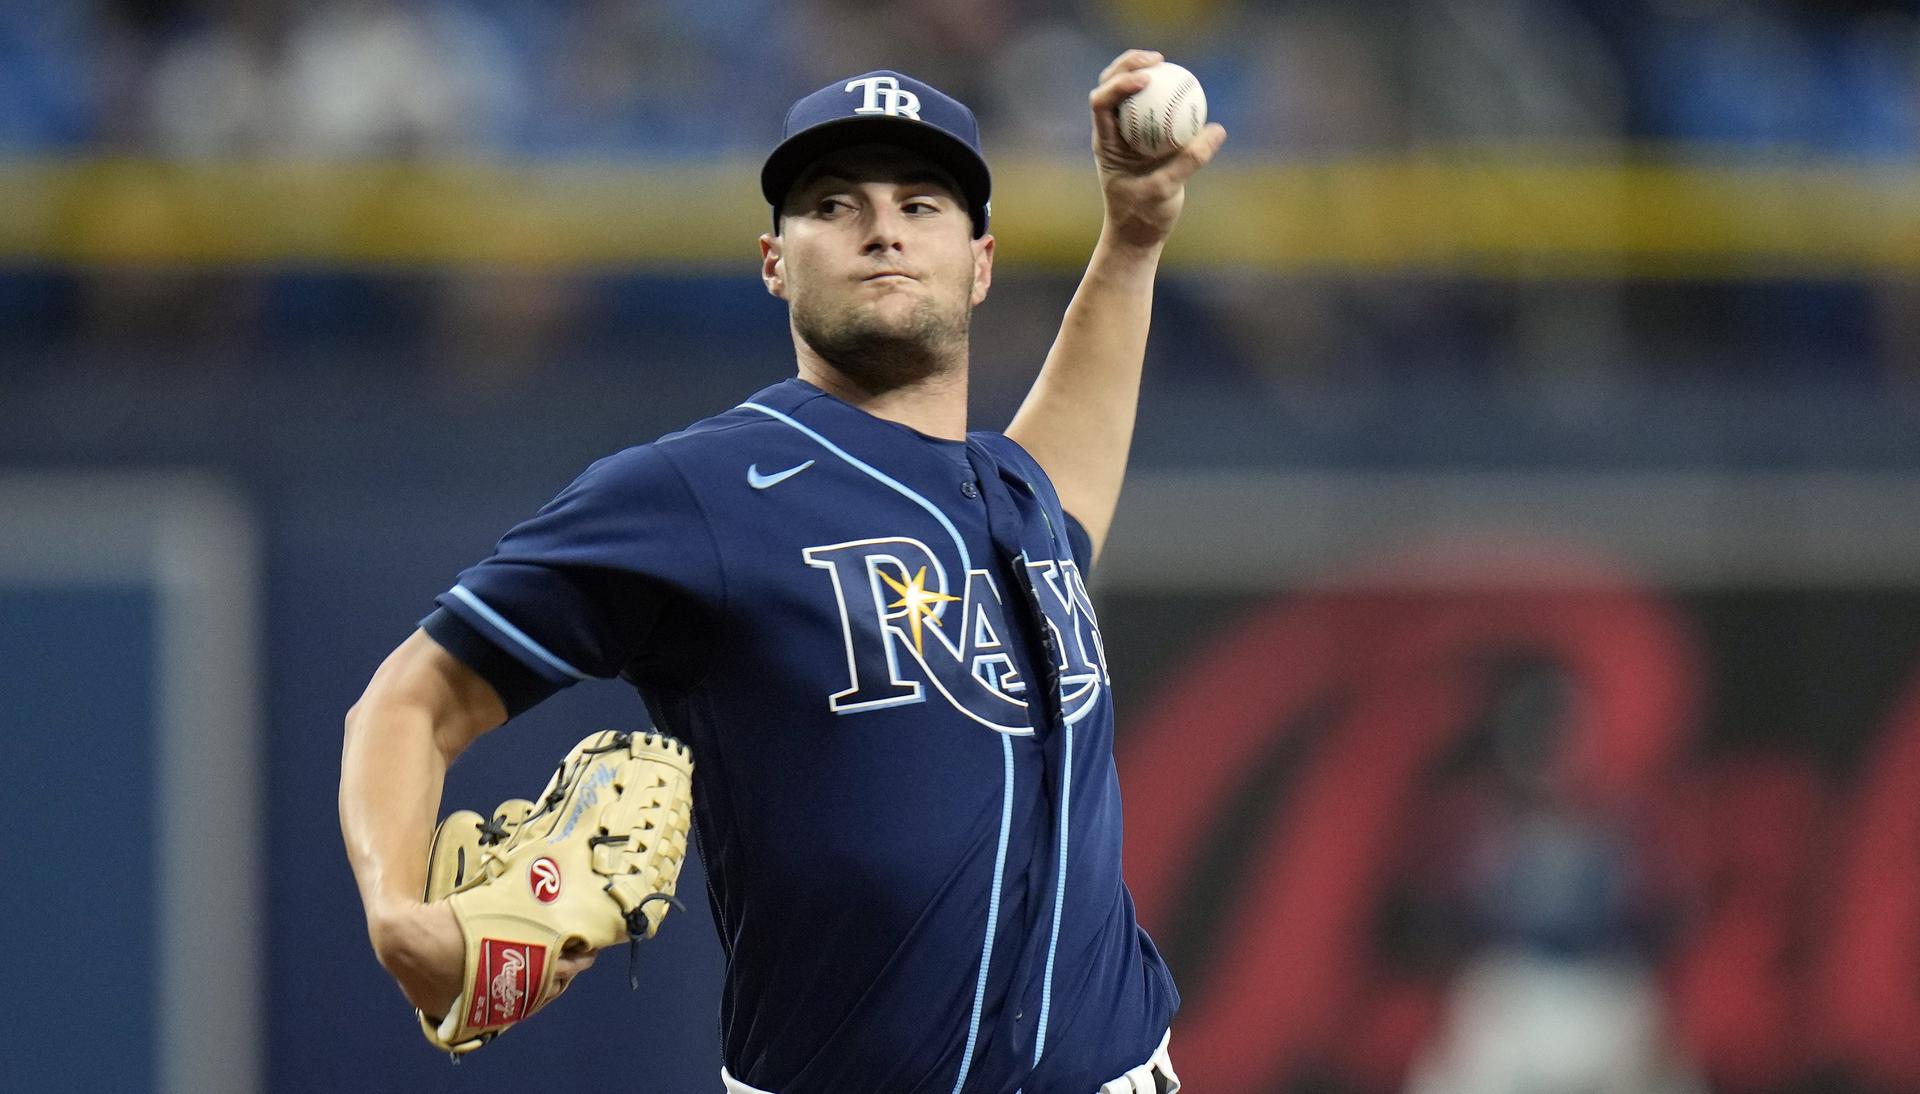 Rays vs. Orioles Player Prop Bets Today – July 26, 2022: Expect a Dominant Day on the Mound for McClanahan